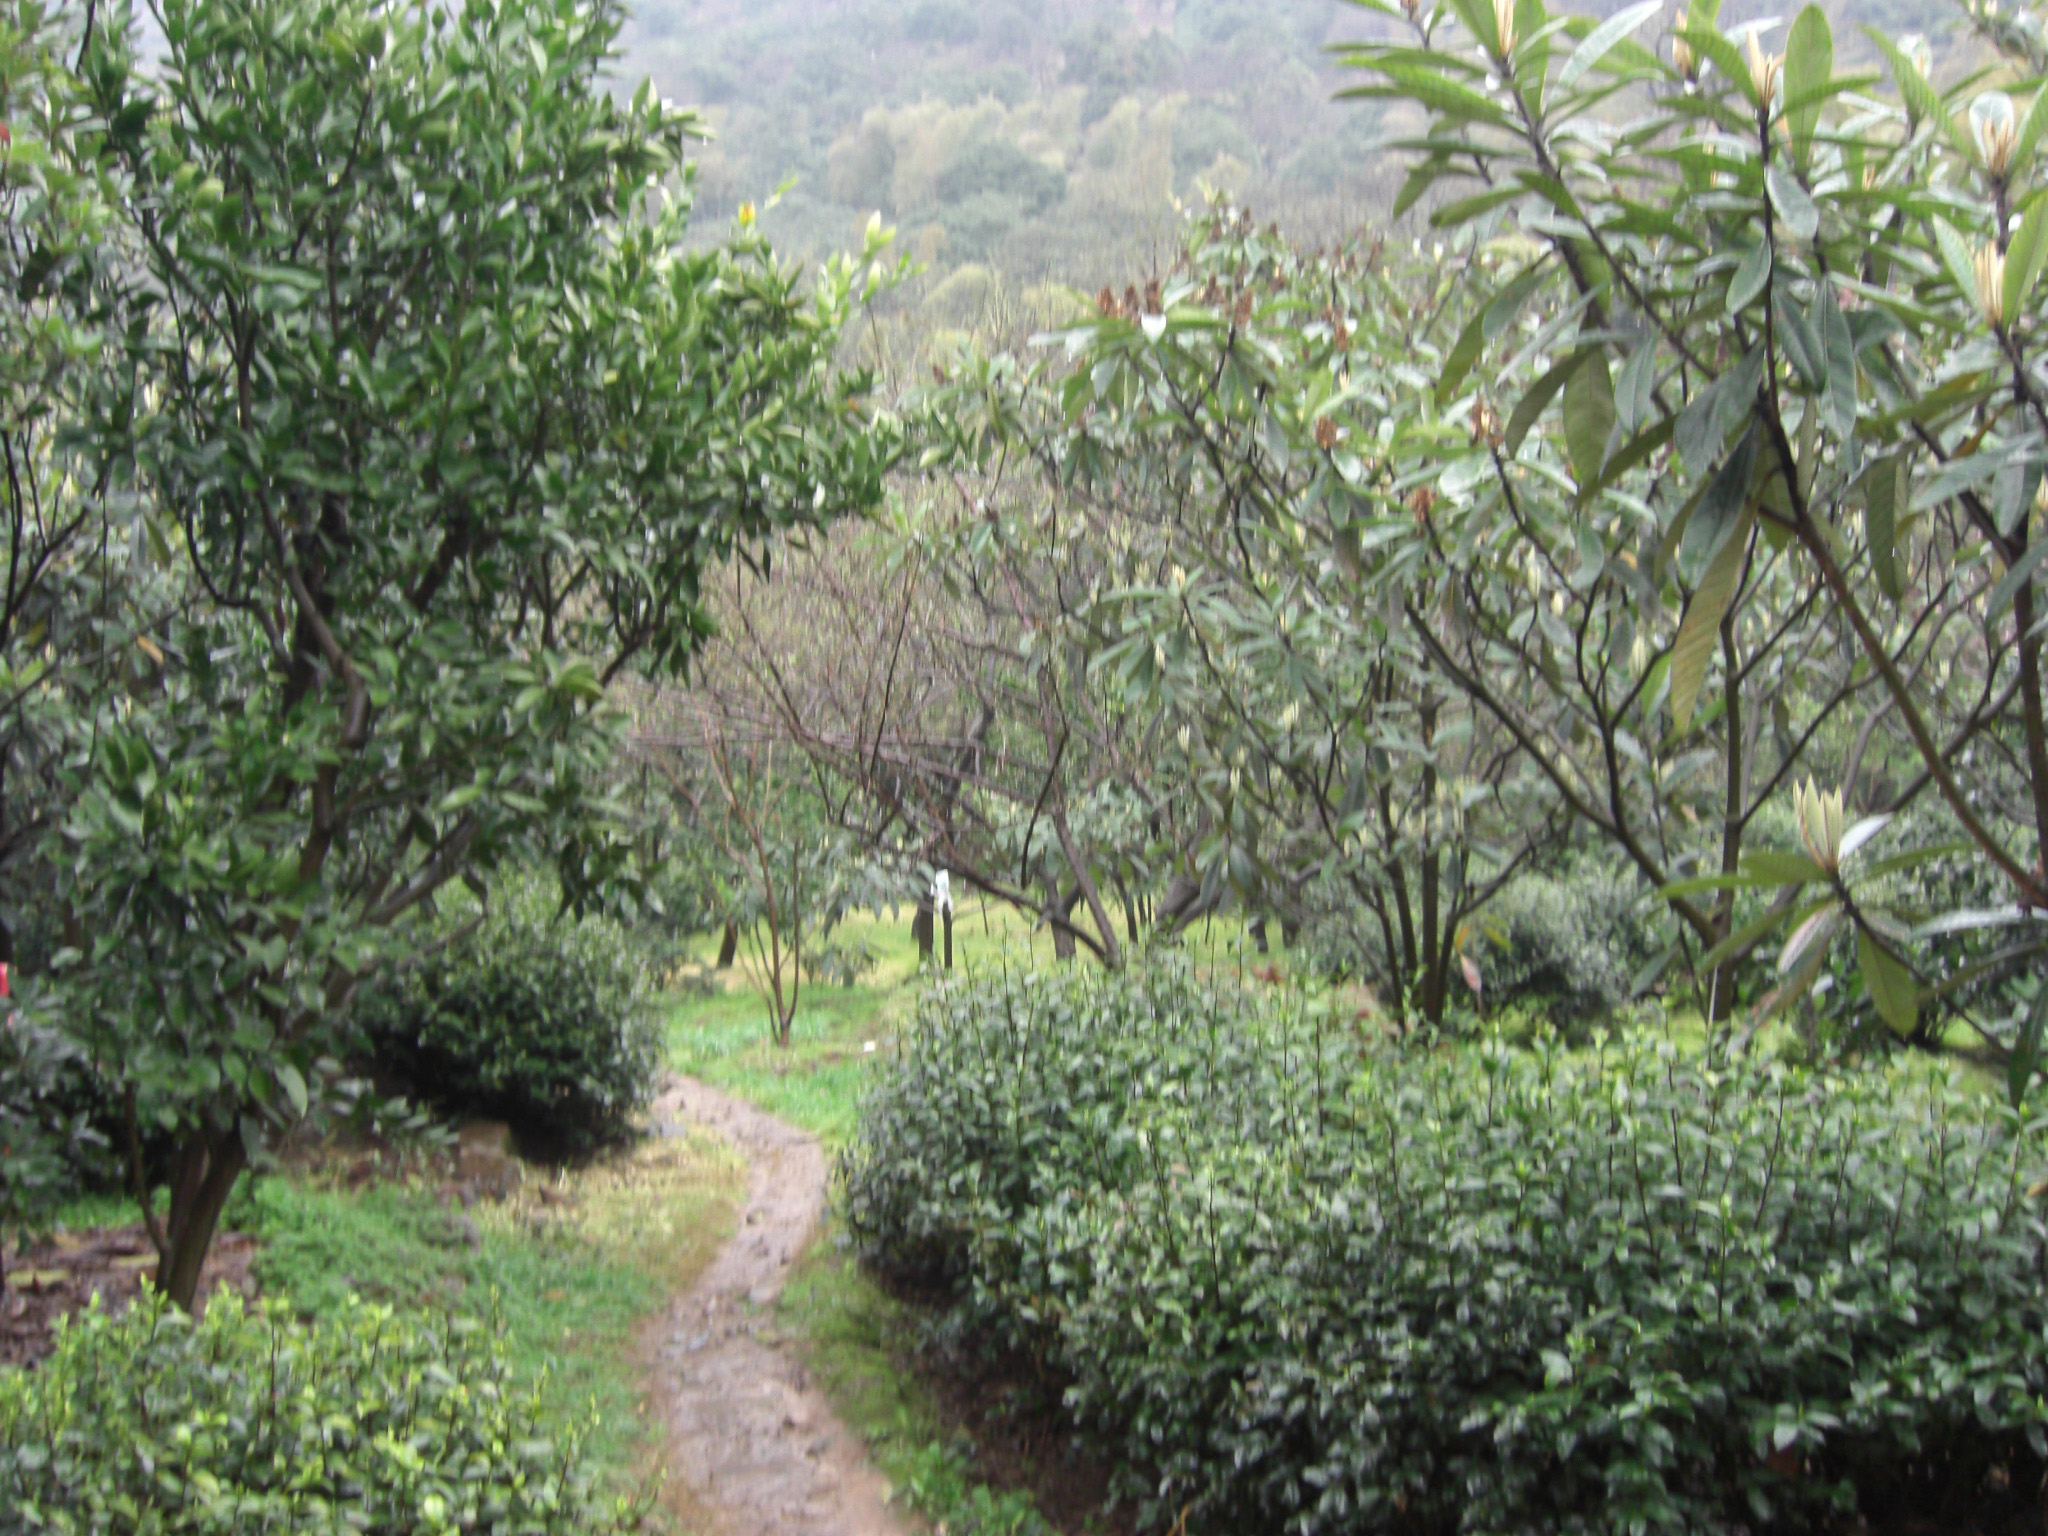 A variety of trees leaning over a dirt path with several tea bushes growing alongside it.